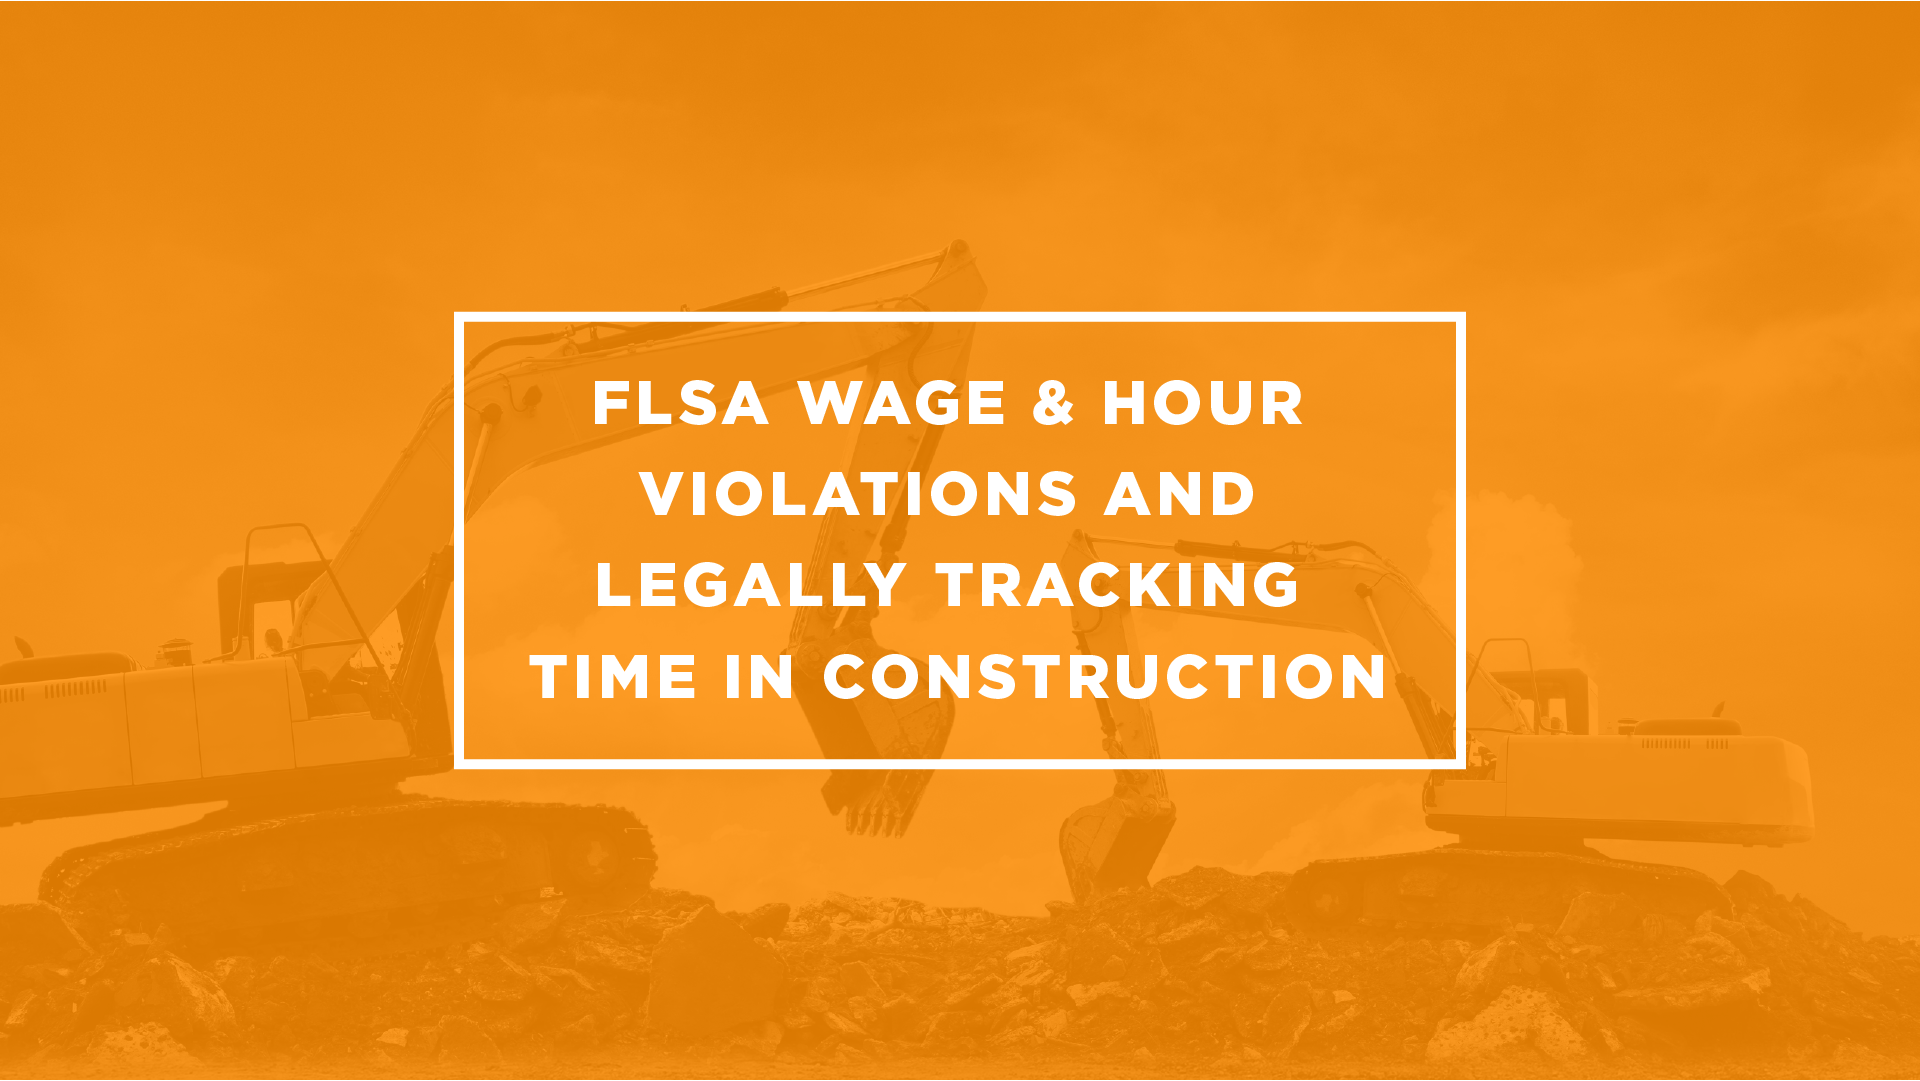 BusyBusy for accurate time tracking to prevent FLSA hour and wage violations